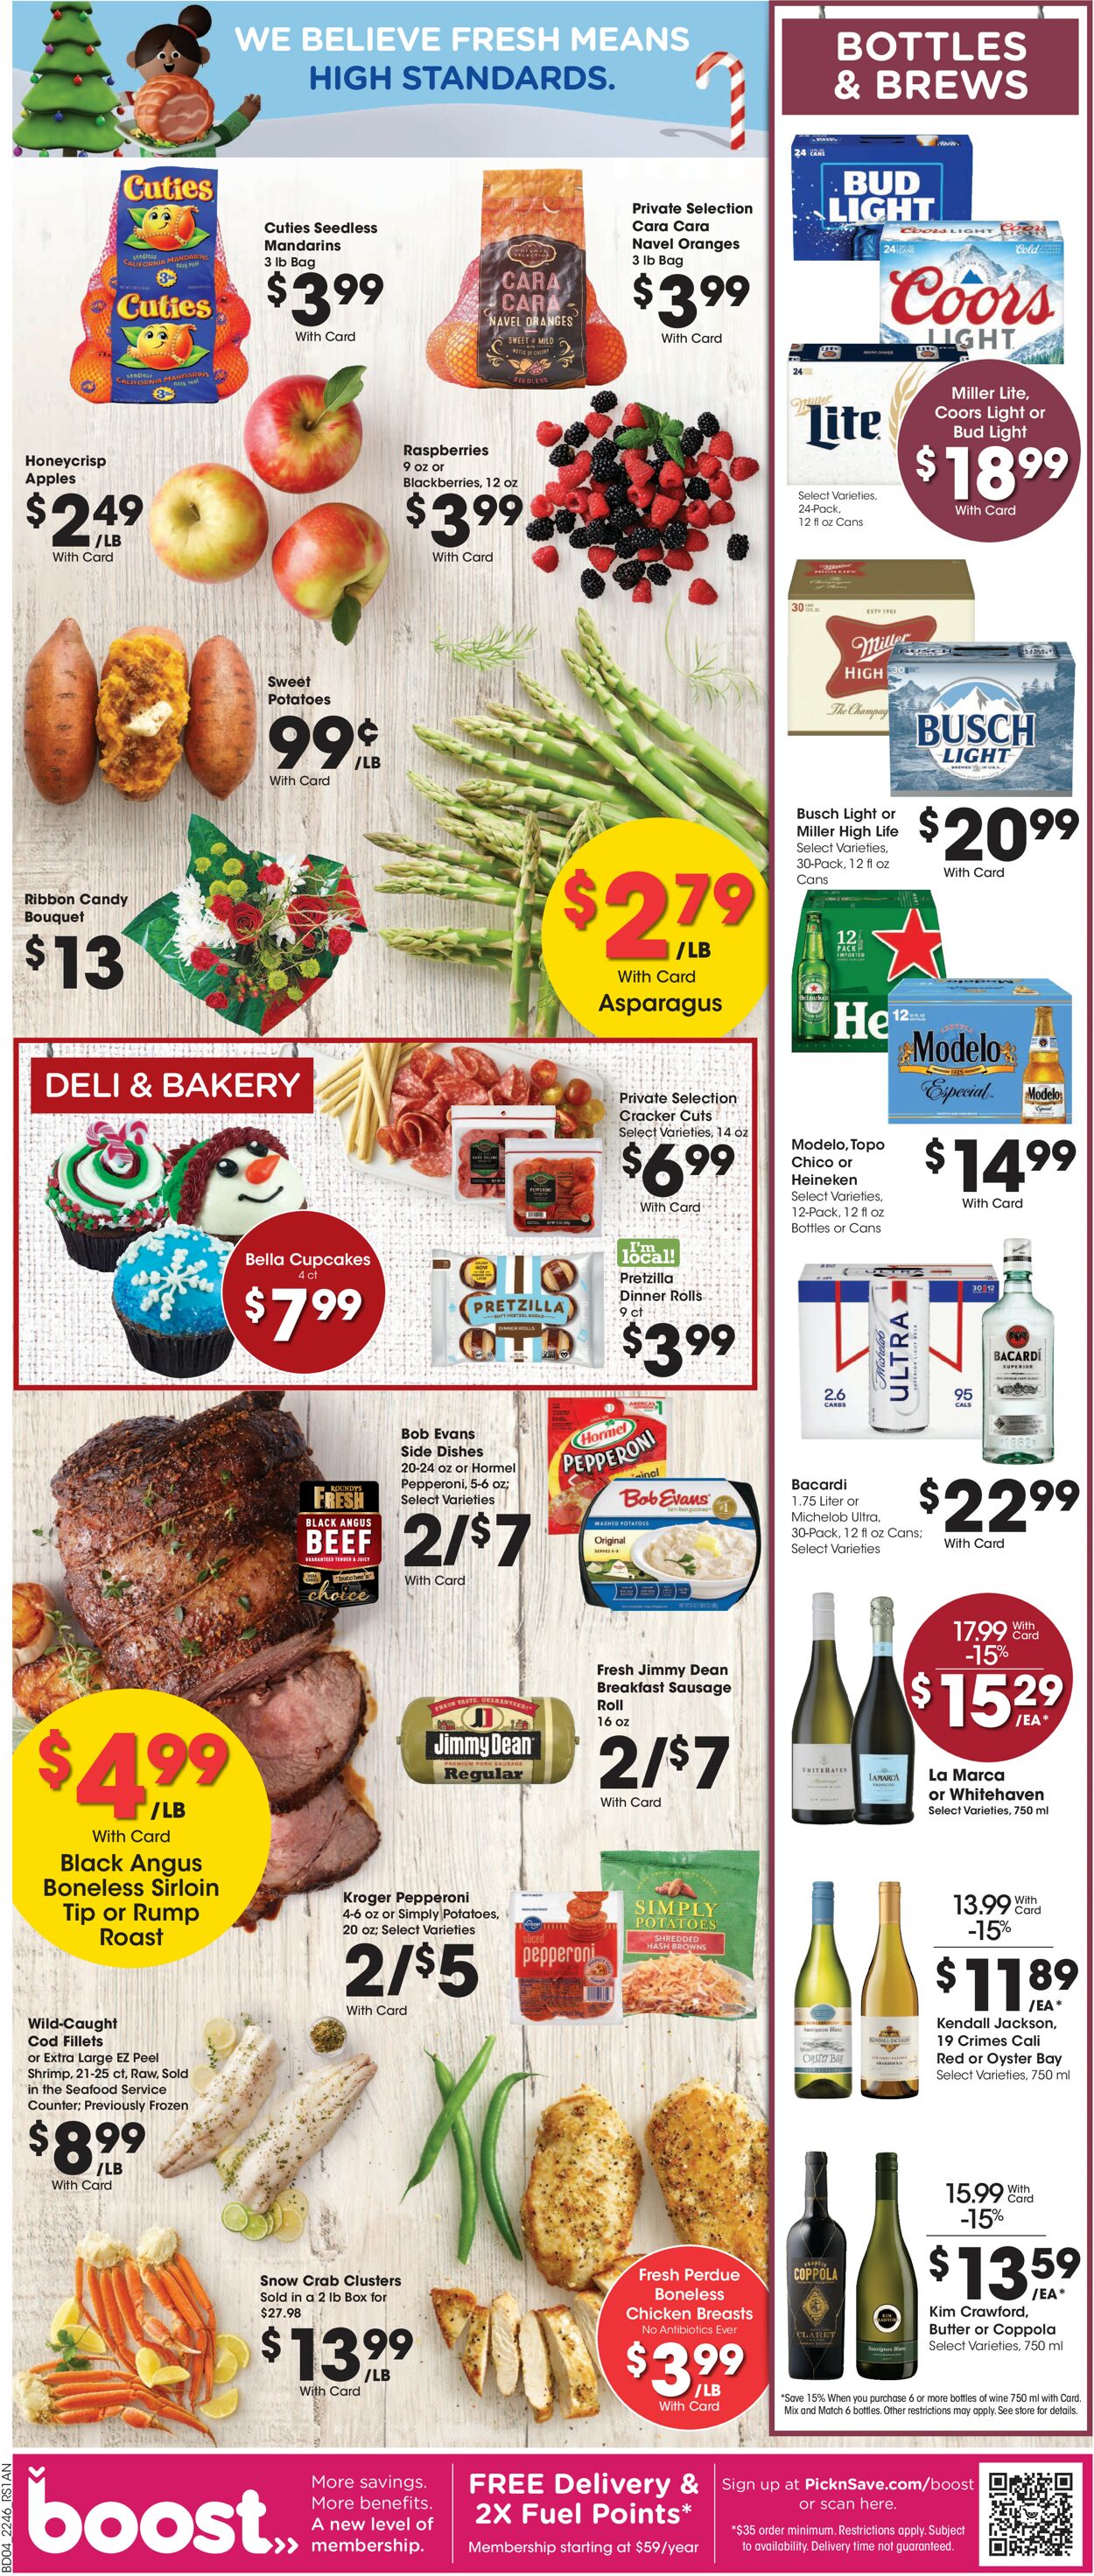 Pick ‘n Save Ad from 12/14/2022